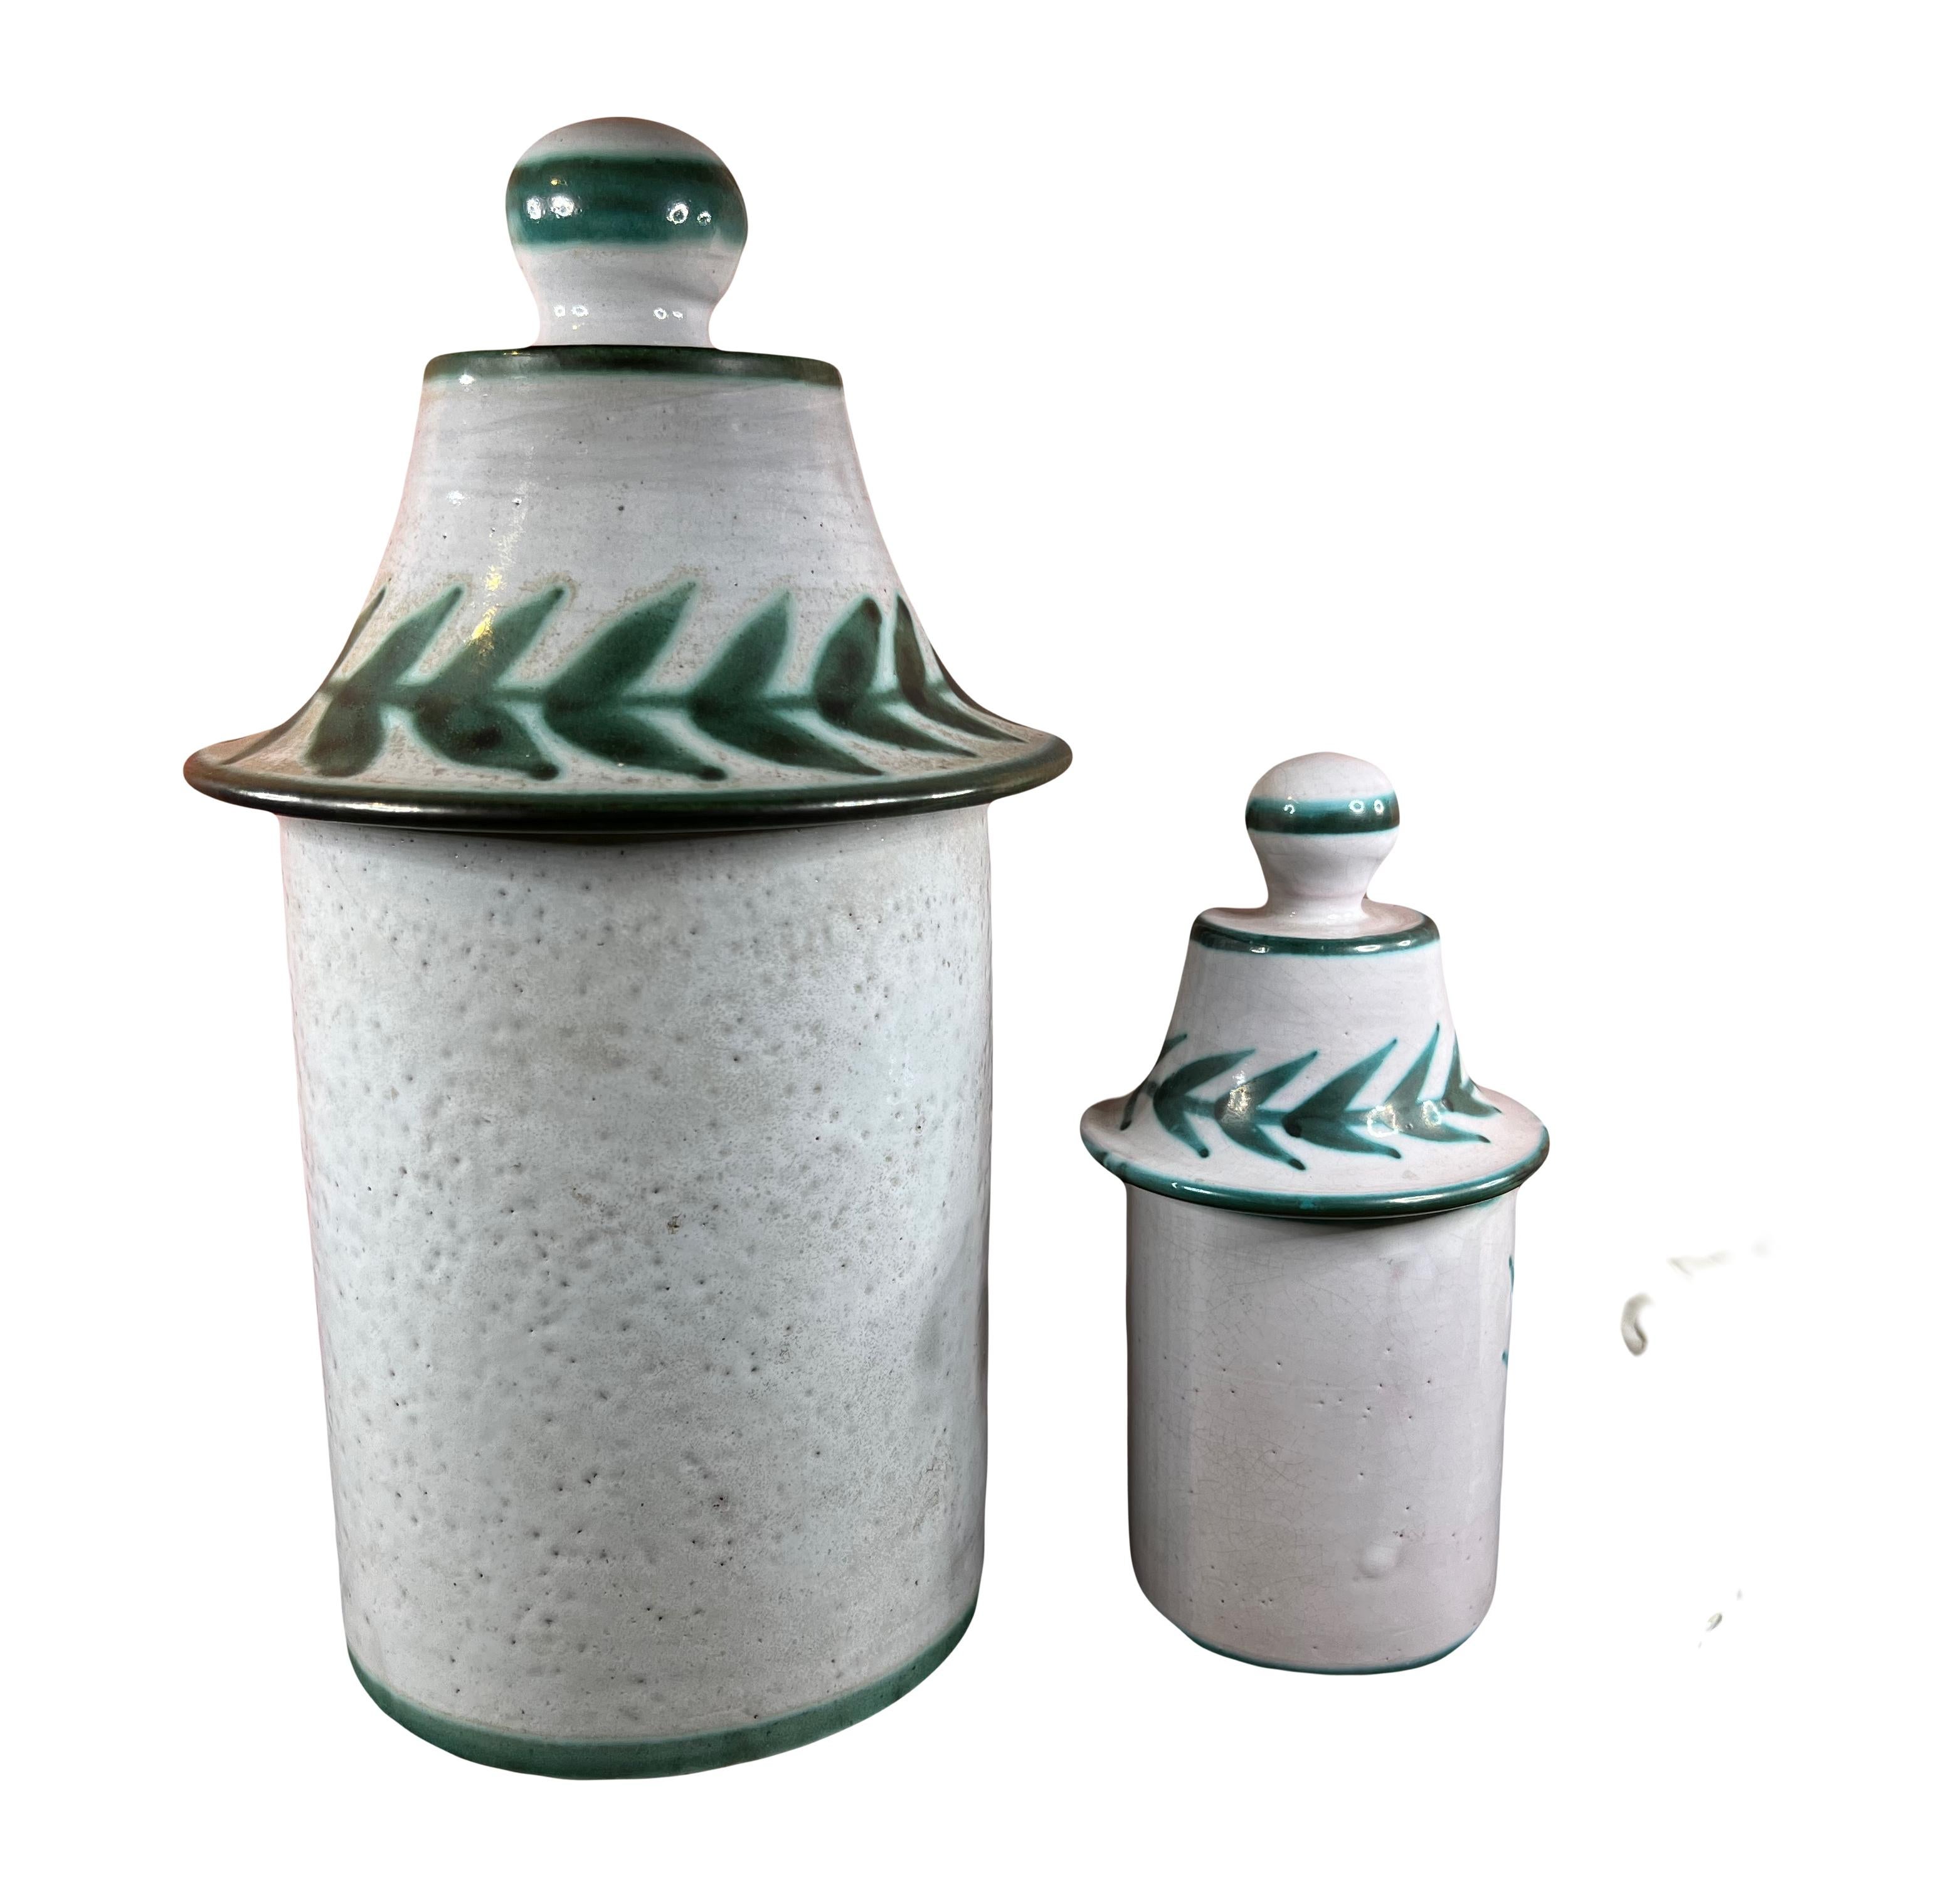 Faience 2 Robert Picault Vallauris mid-century pharmacy jars from the 50s For Sale